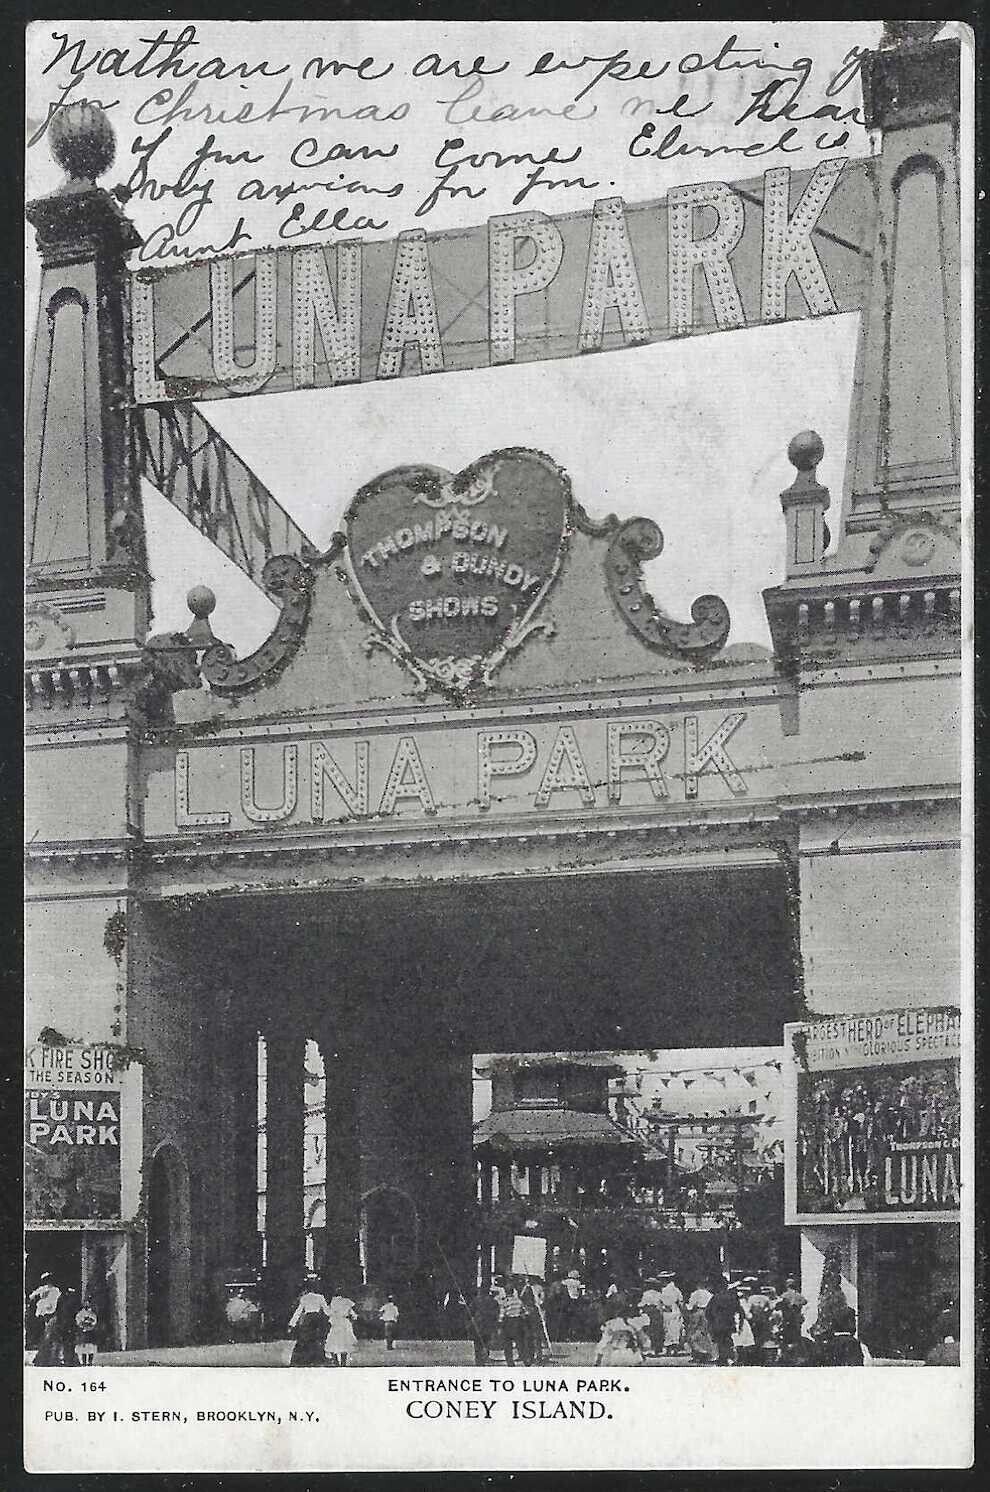 Entrance to Luna Park, Coney Island, Brooklyn, NYC, Early Postcard, Used in 1907